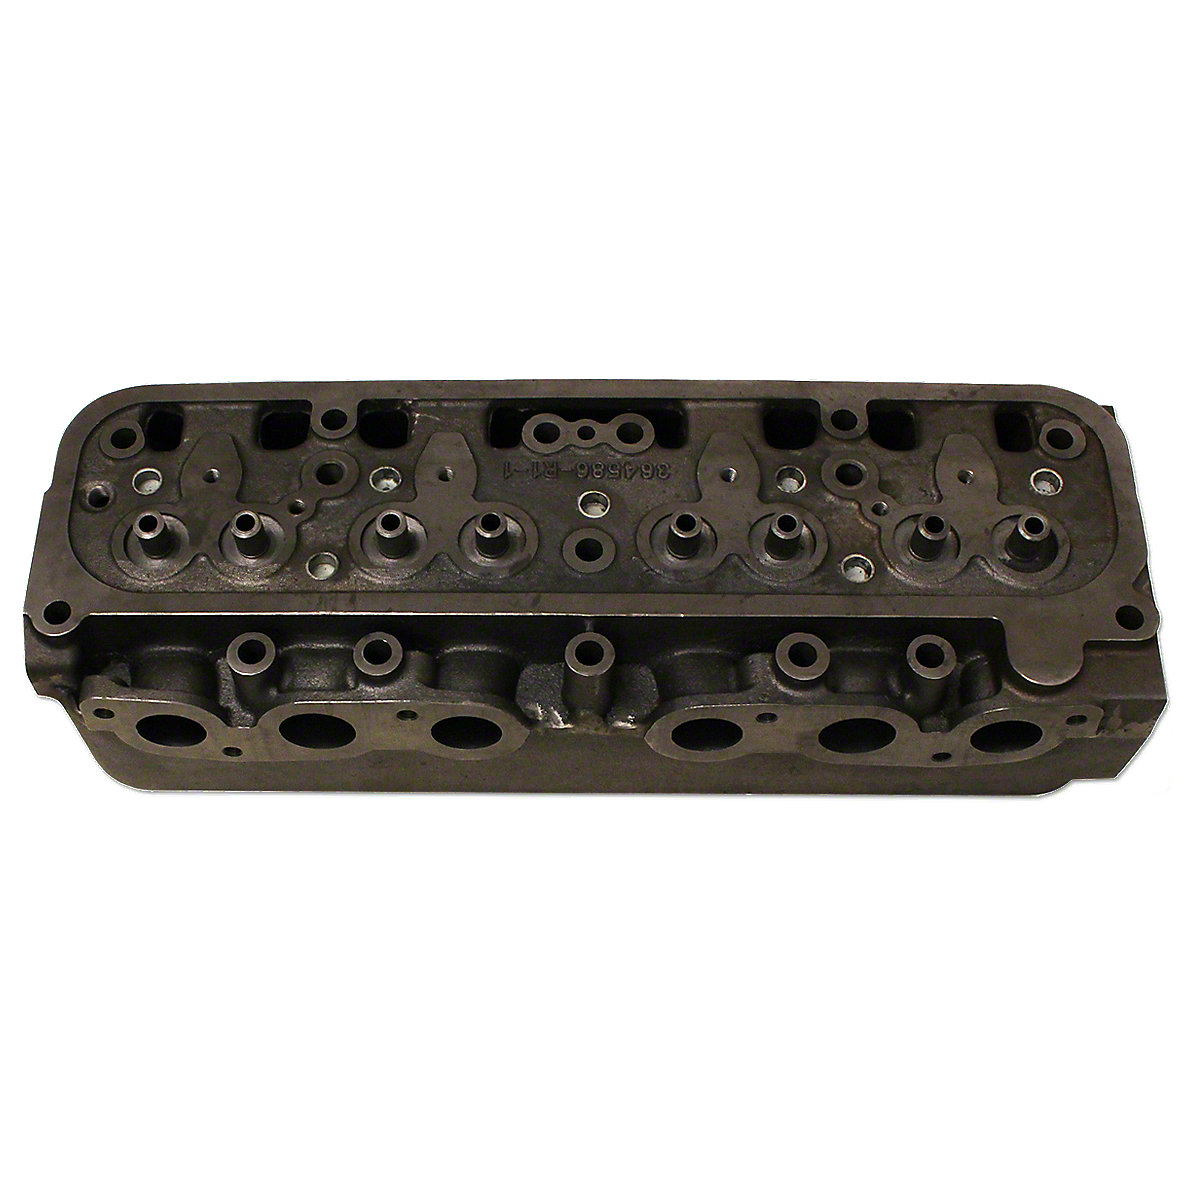 450 LP High Compression Cylinder Head With Guides and Seats.